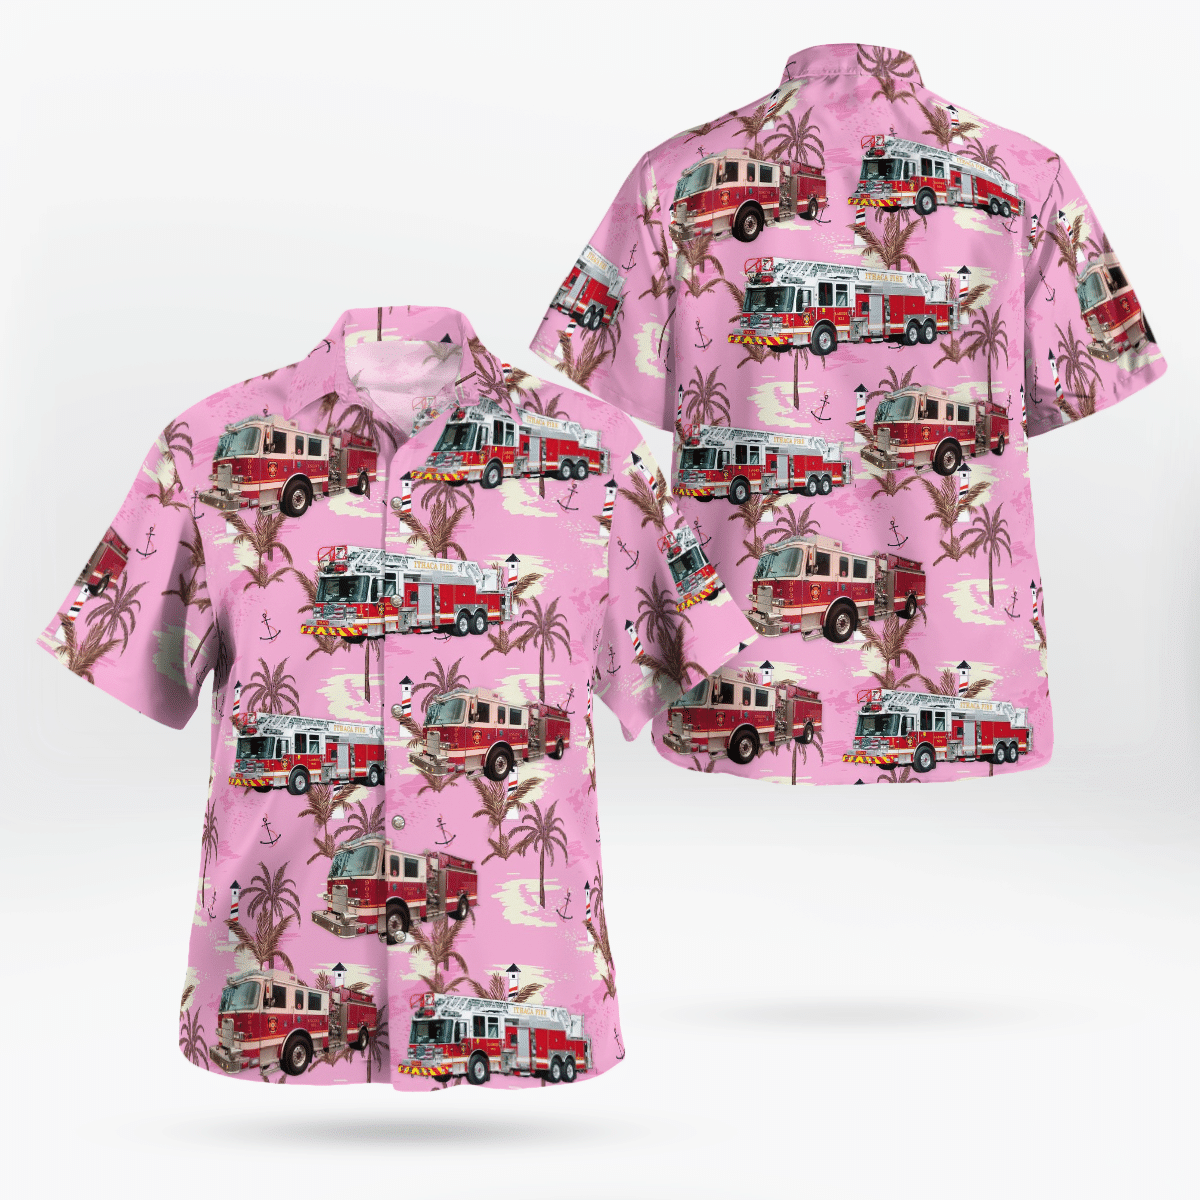 If you are in need of a new summertime look, pick up this Hawaiian shirt 66